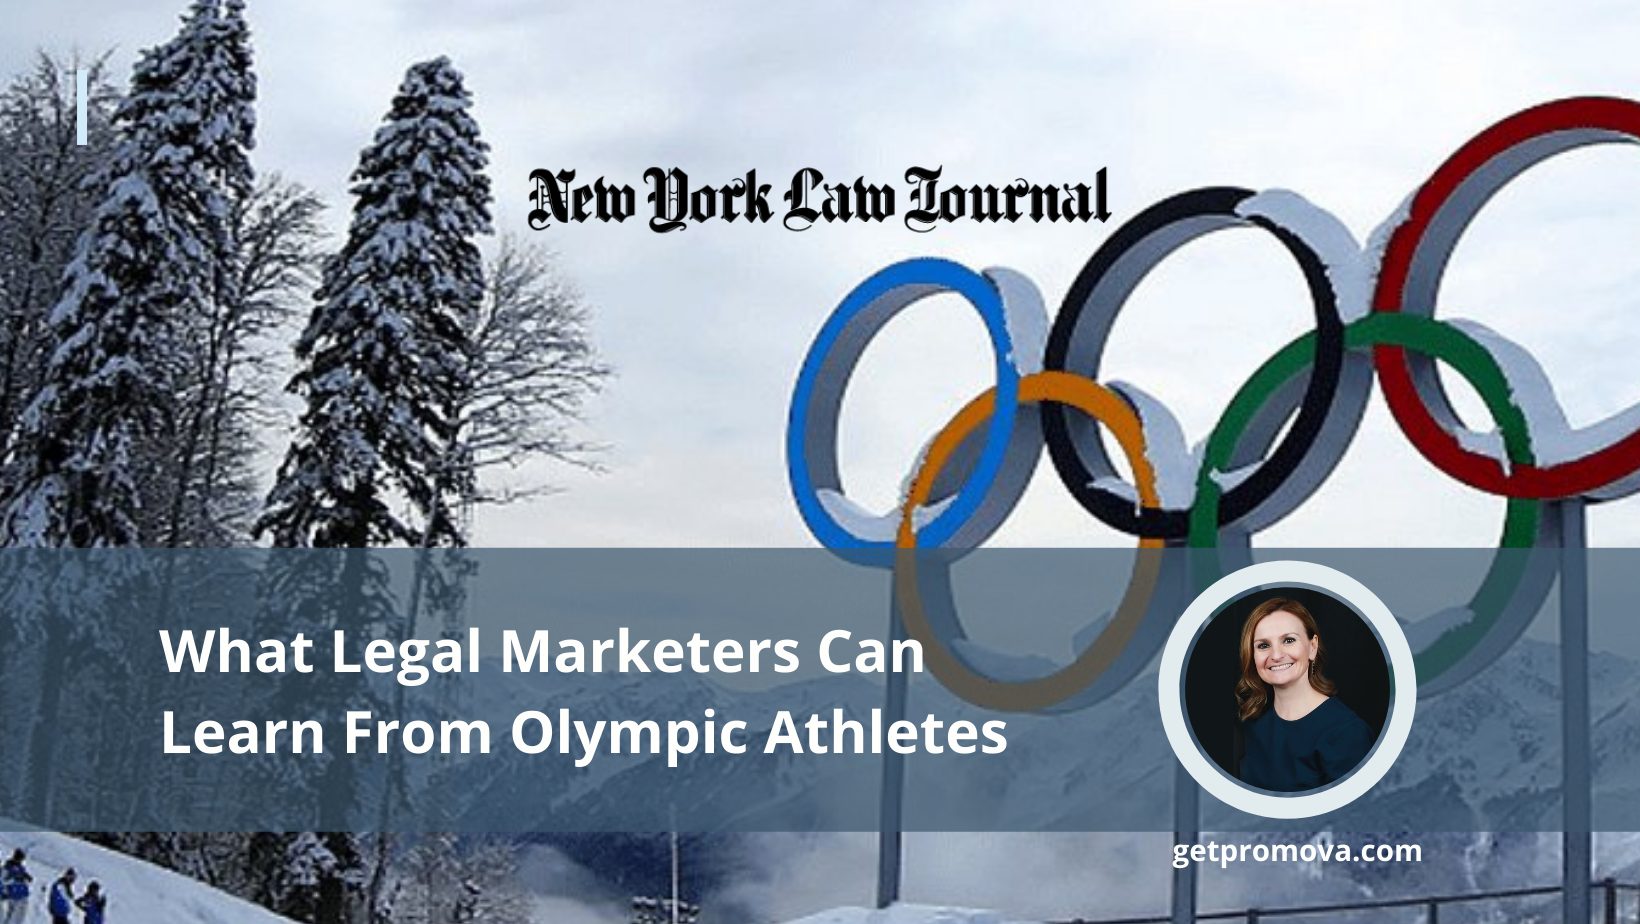 Featured image for “What Legal Marketers Can Learn From Olympic Athletes”